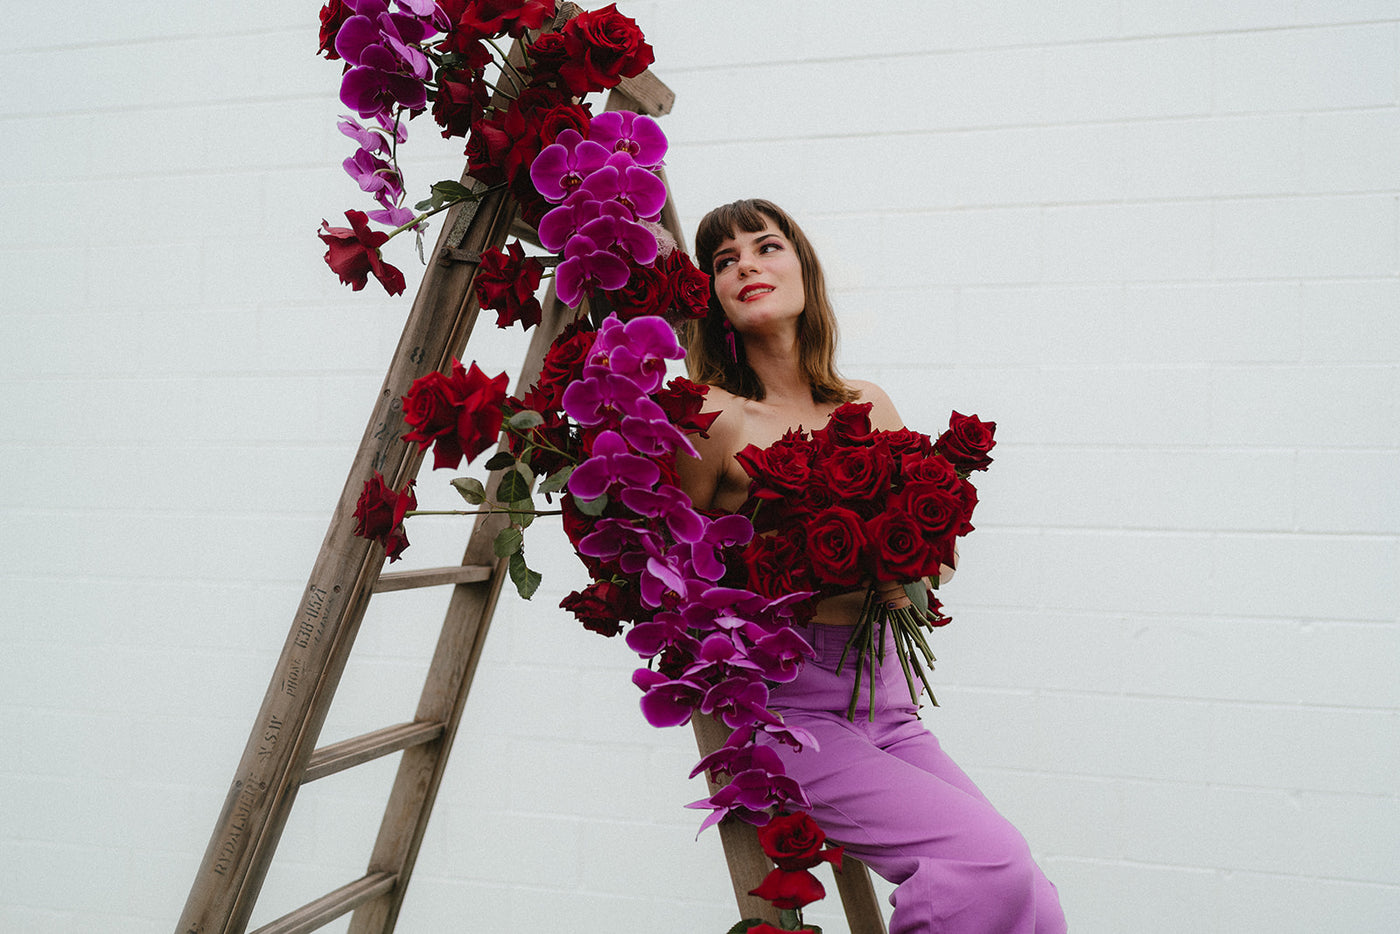 Girl holding bouquet of red roses and cerise orchids